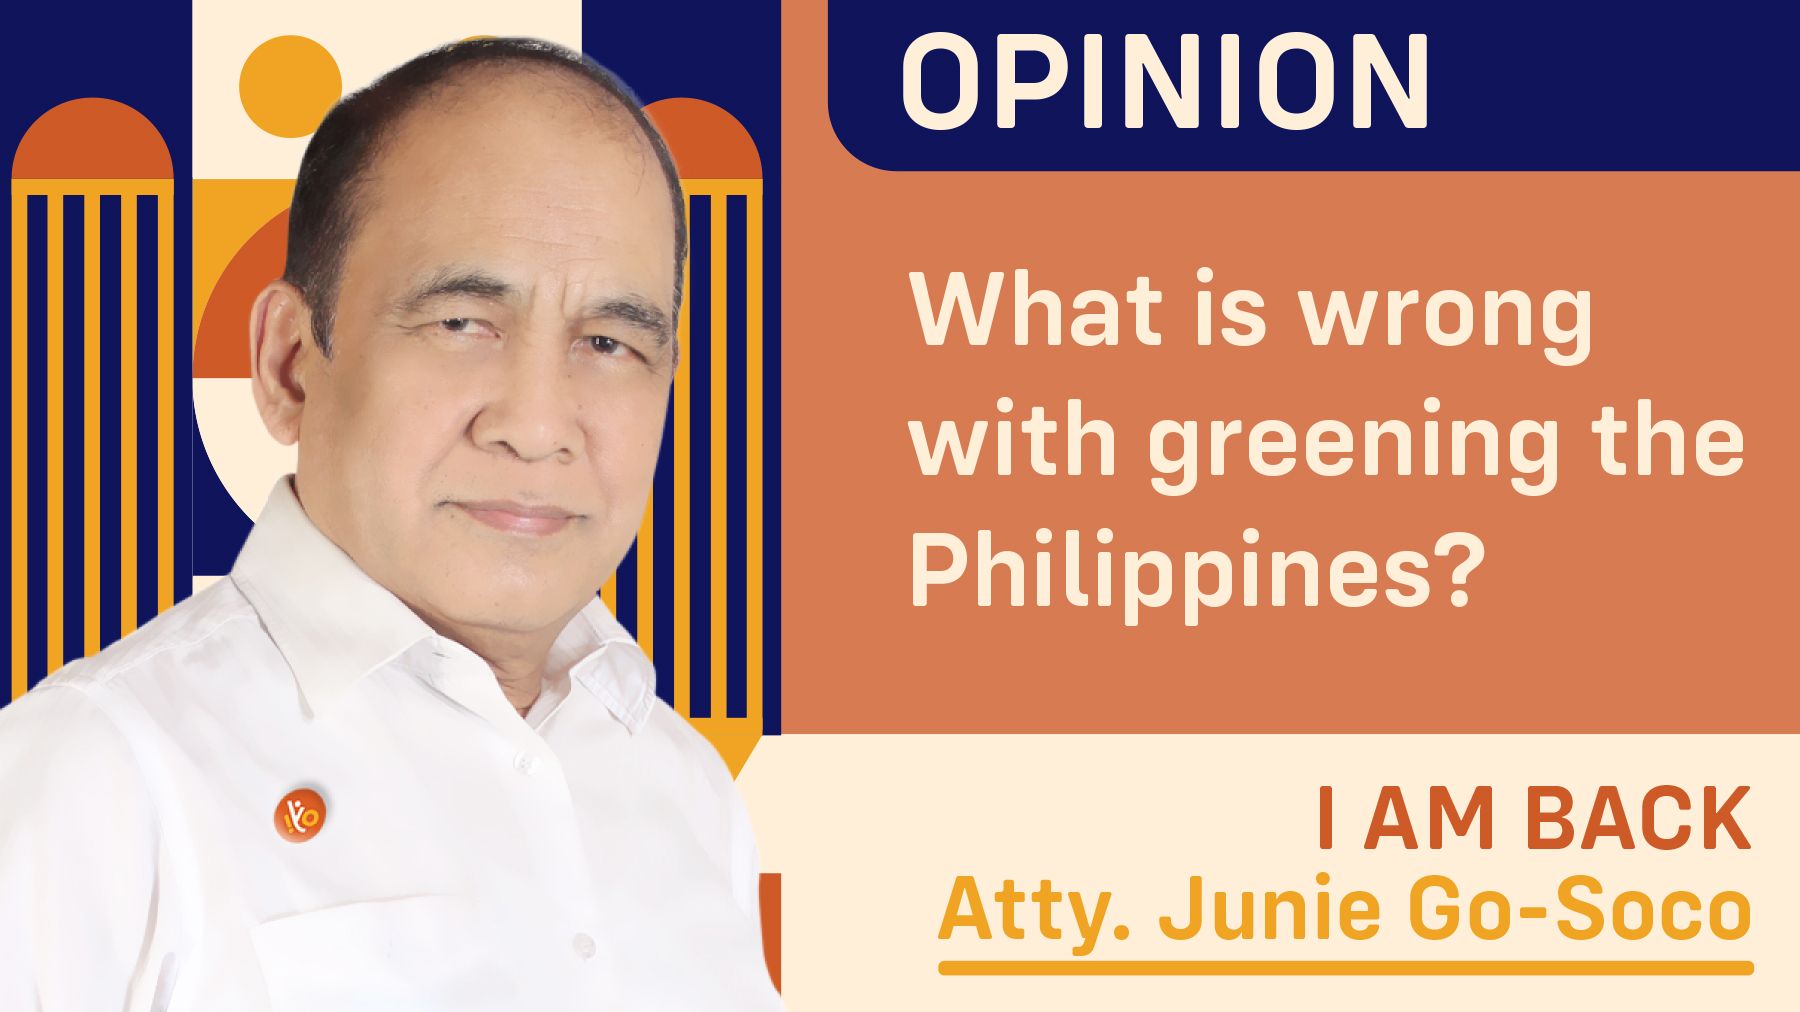 What is wrong with greening the Philippines?